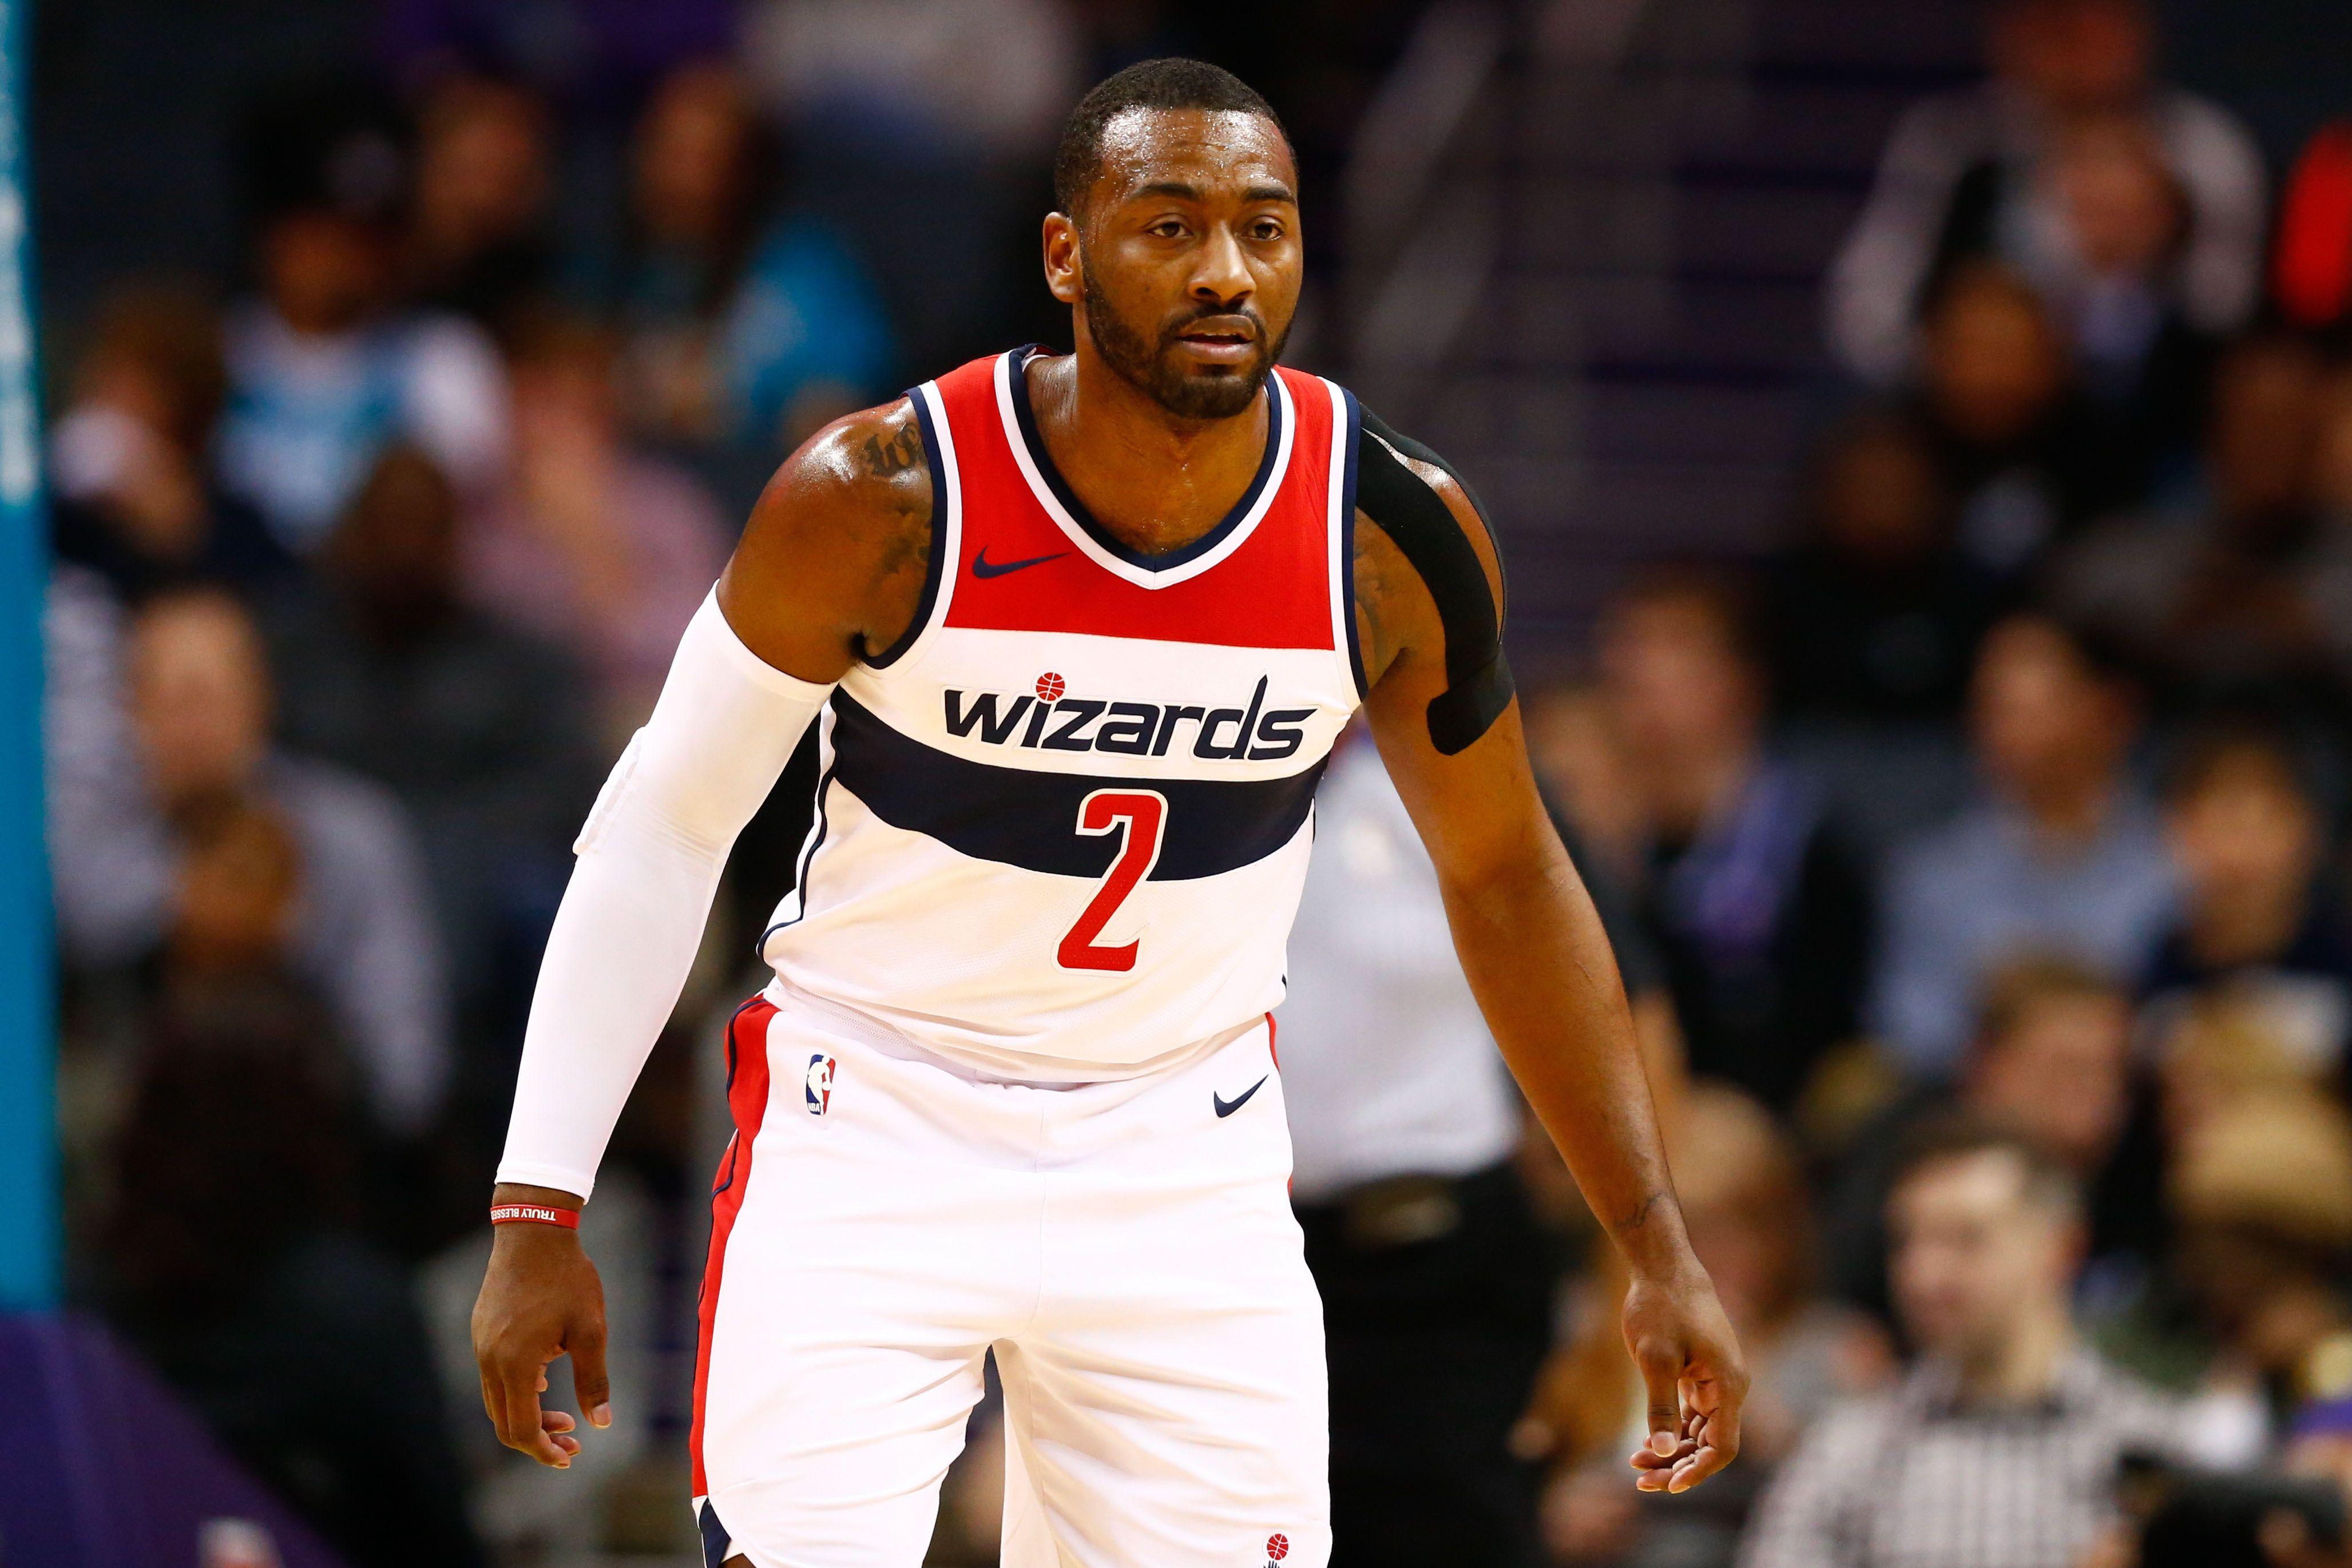 Reports: John Wall likely to be back in lineup tonight vs. Memphis